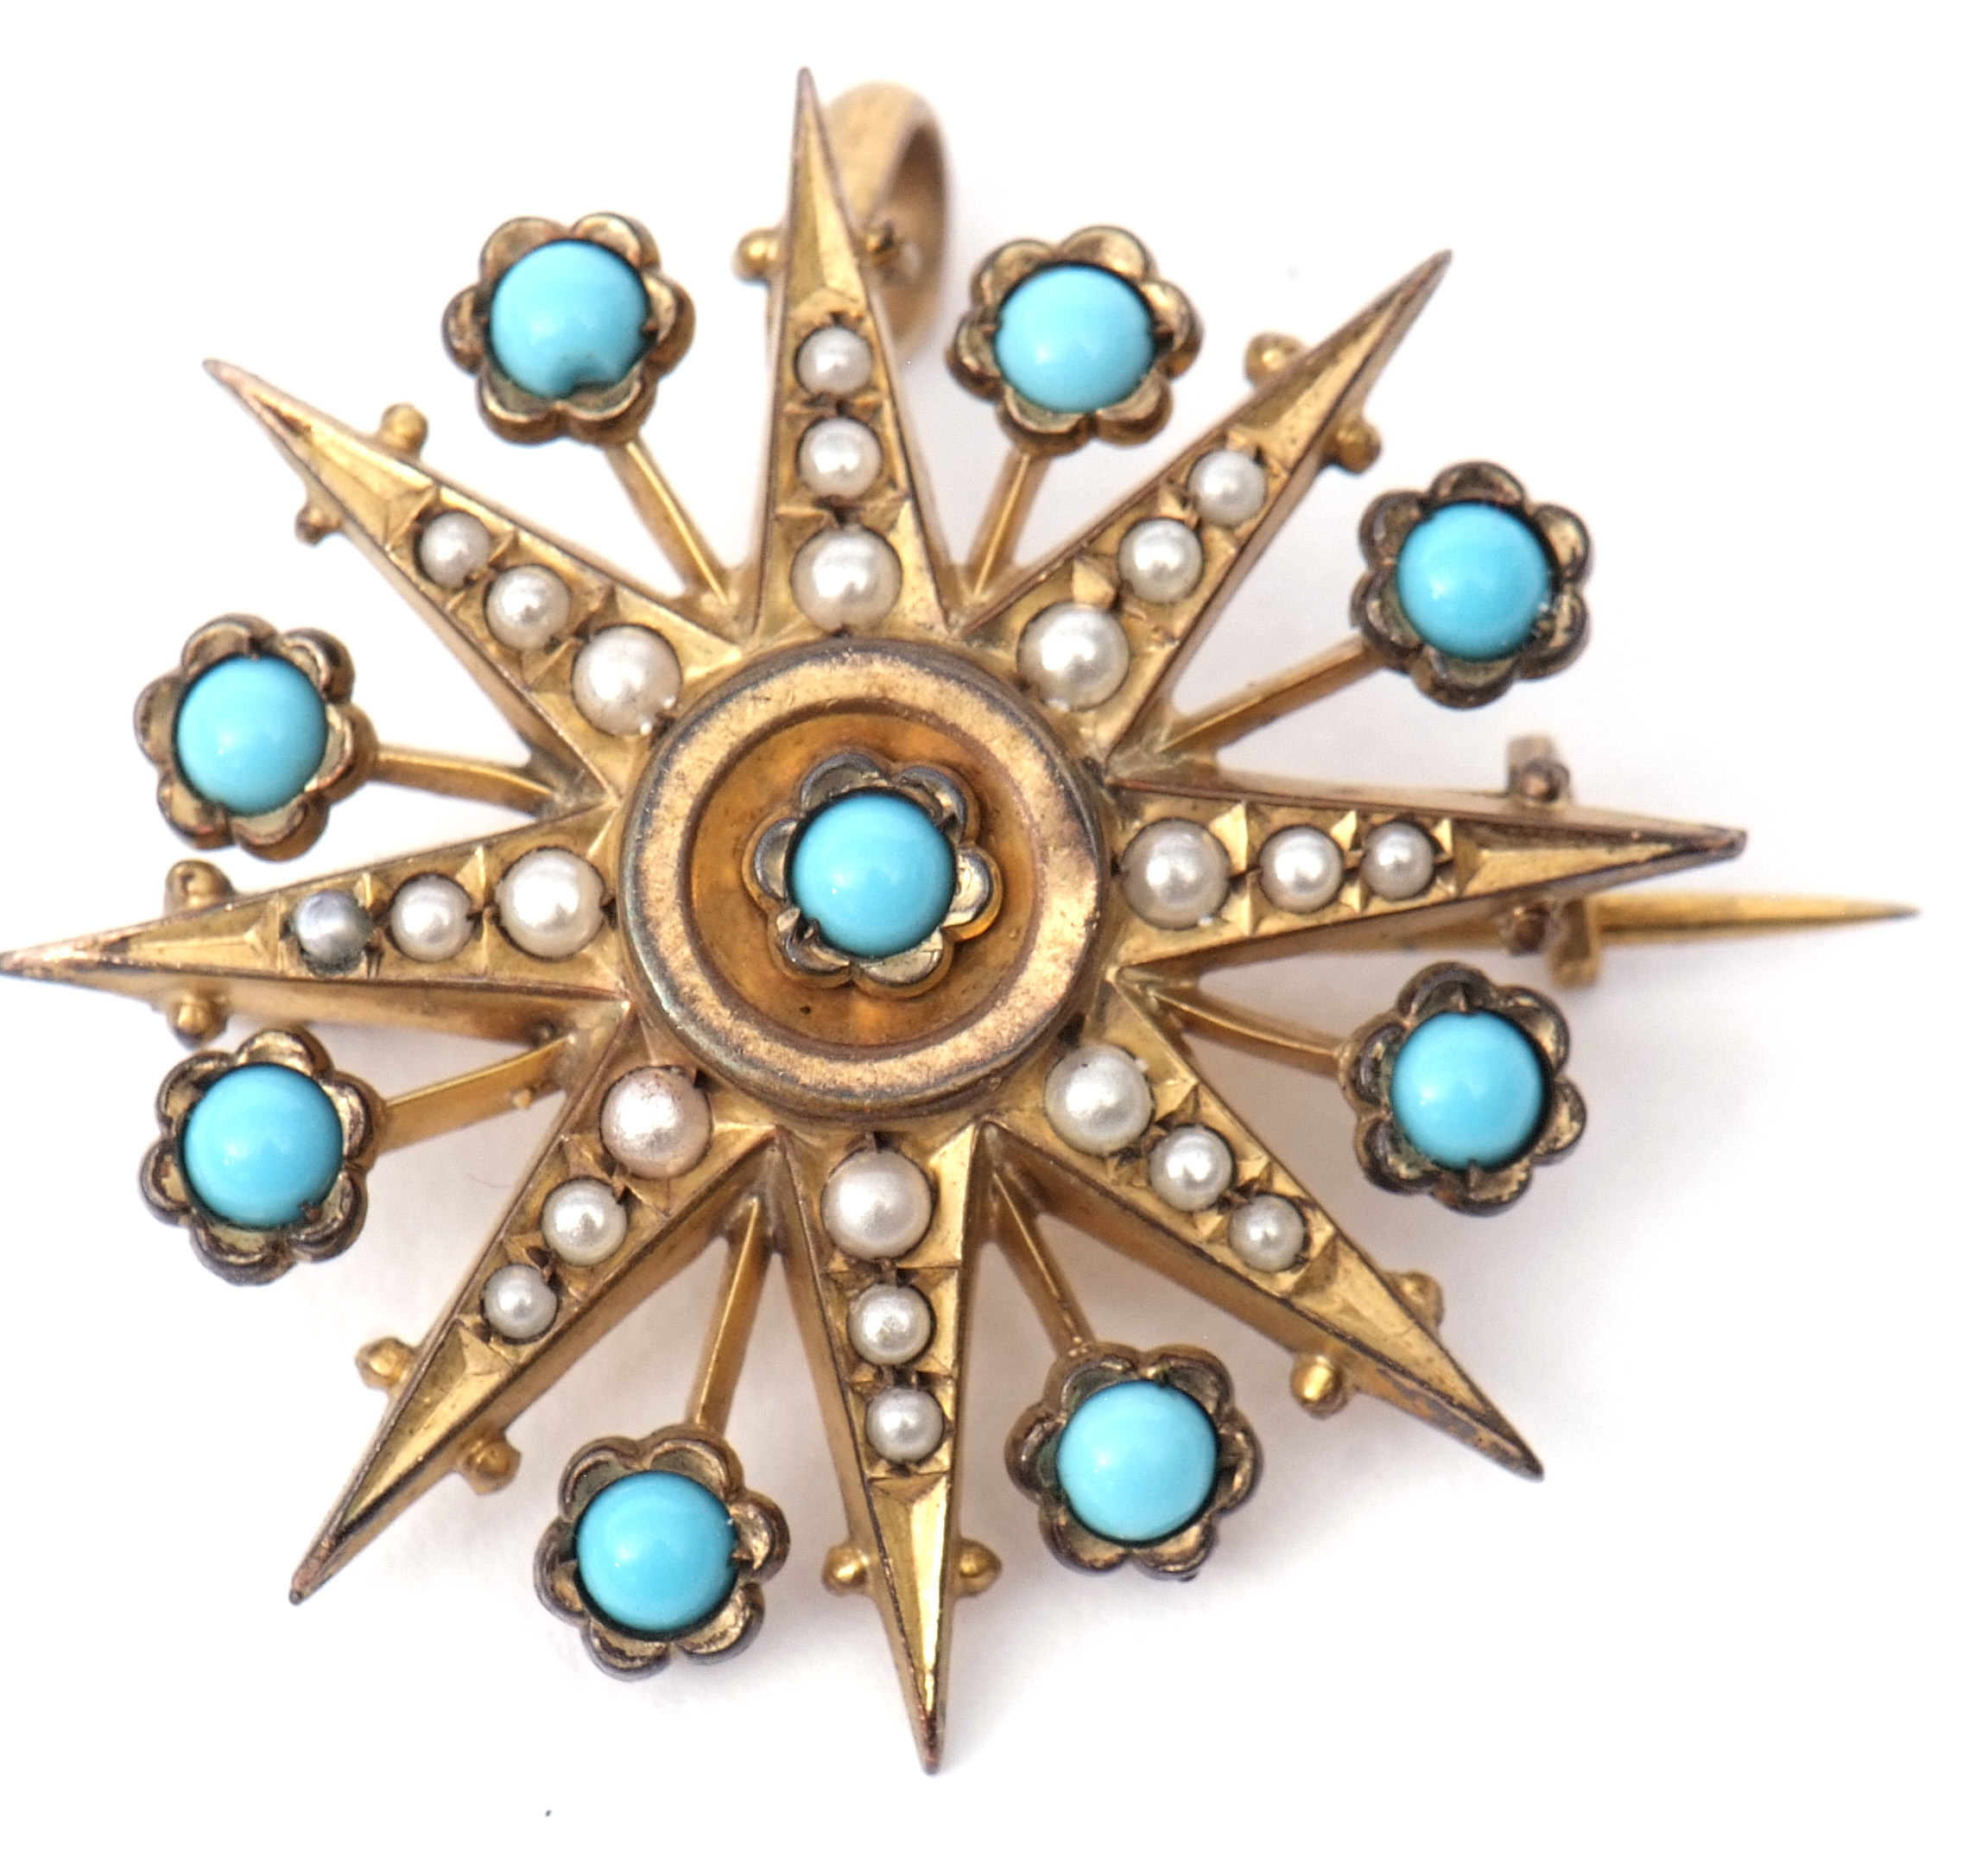 Vintage gilt metal starburst brooch, featuring nine turquoise small stones and graduated small